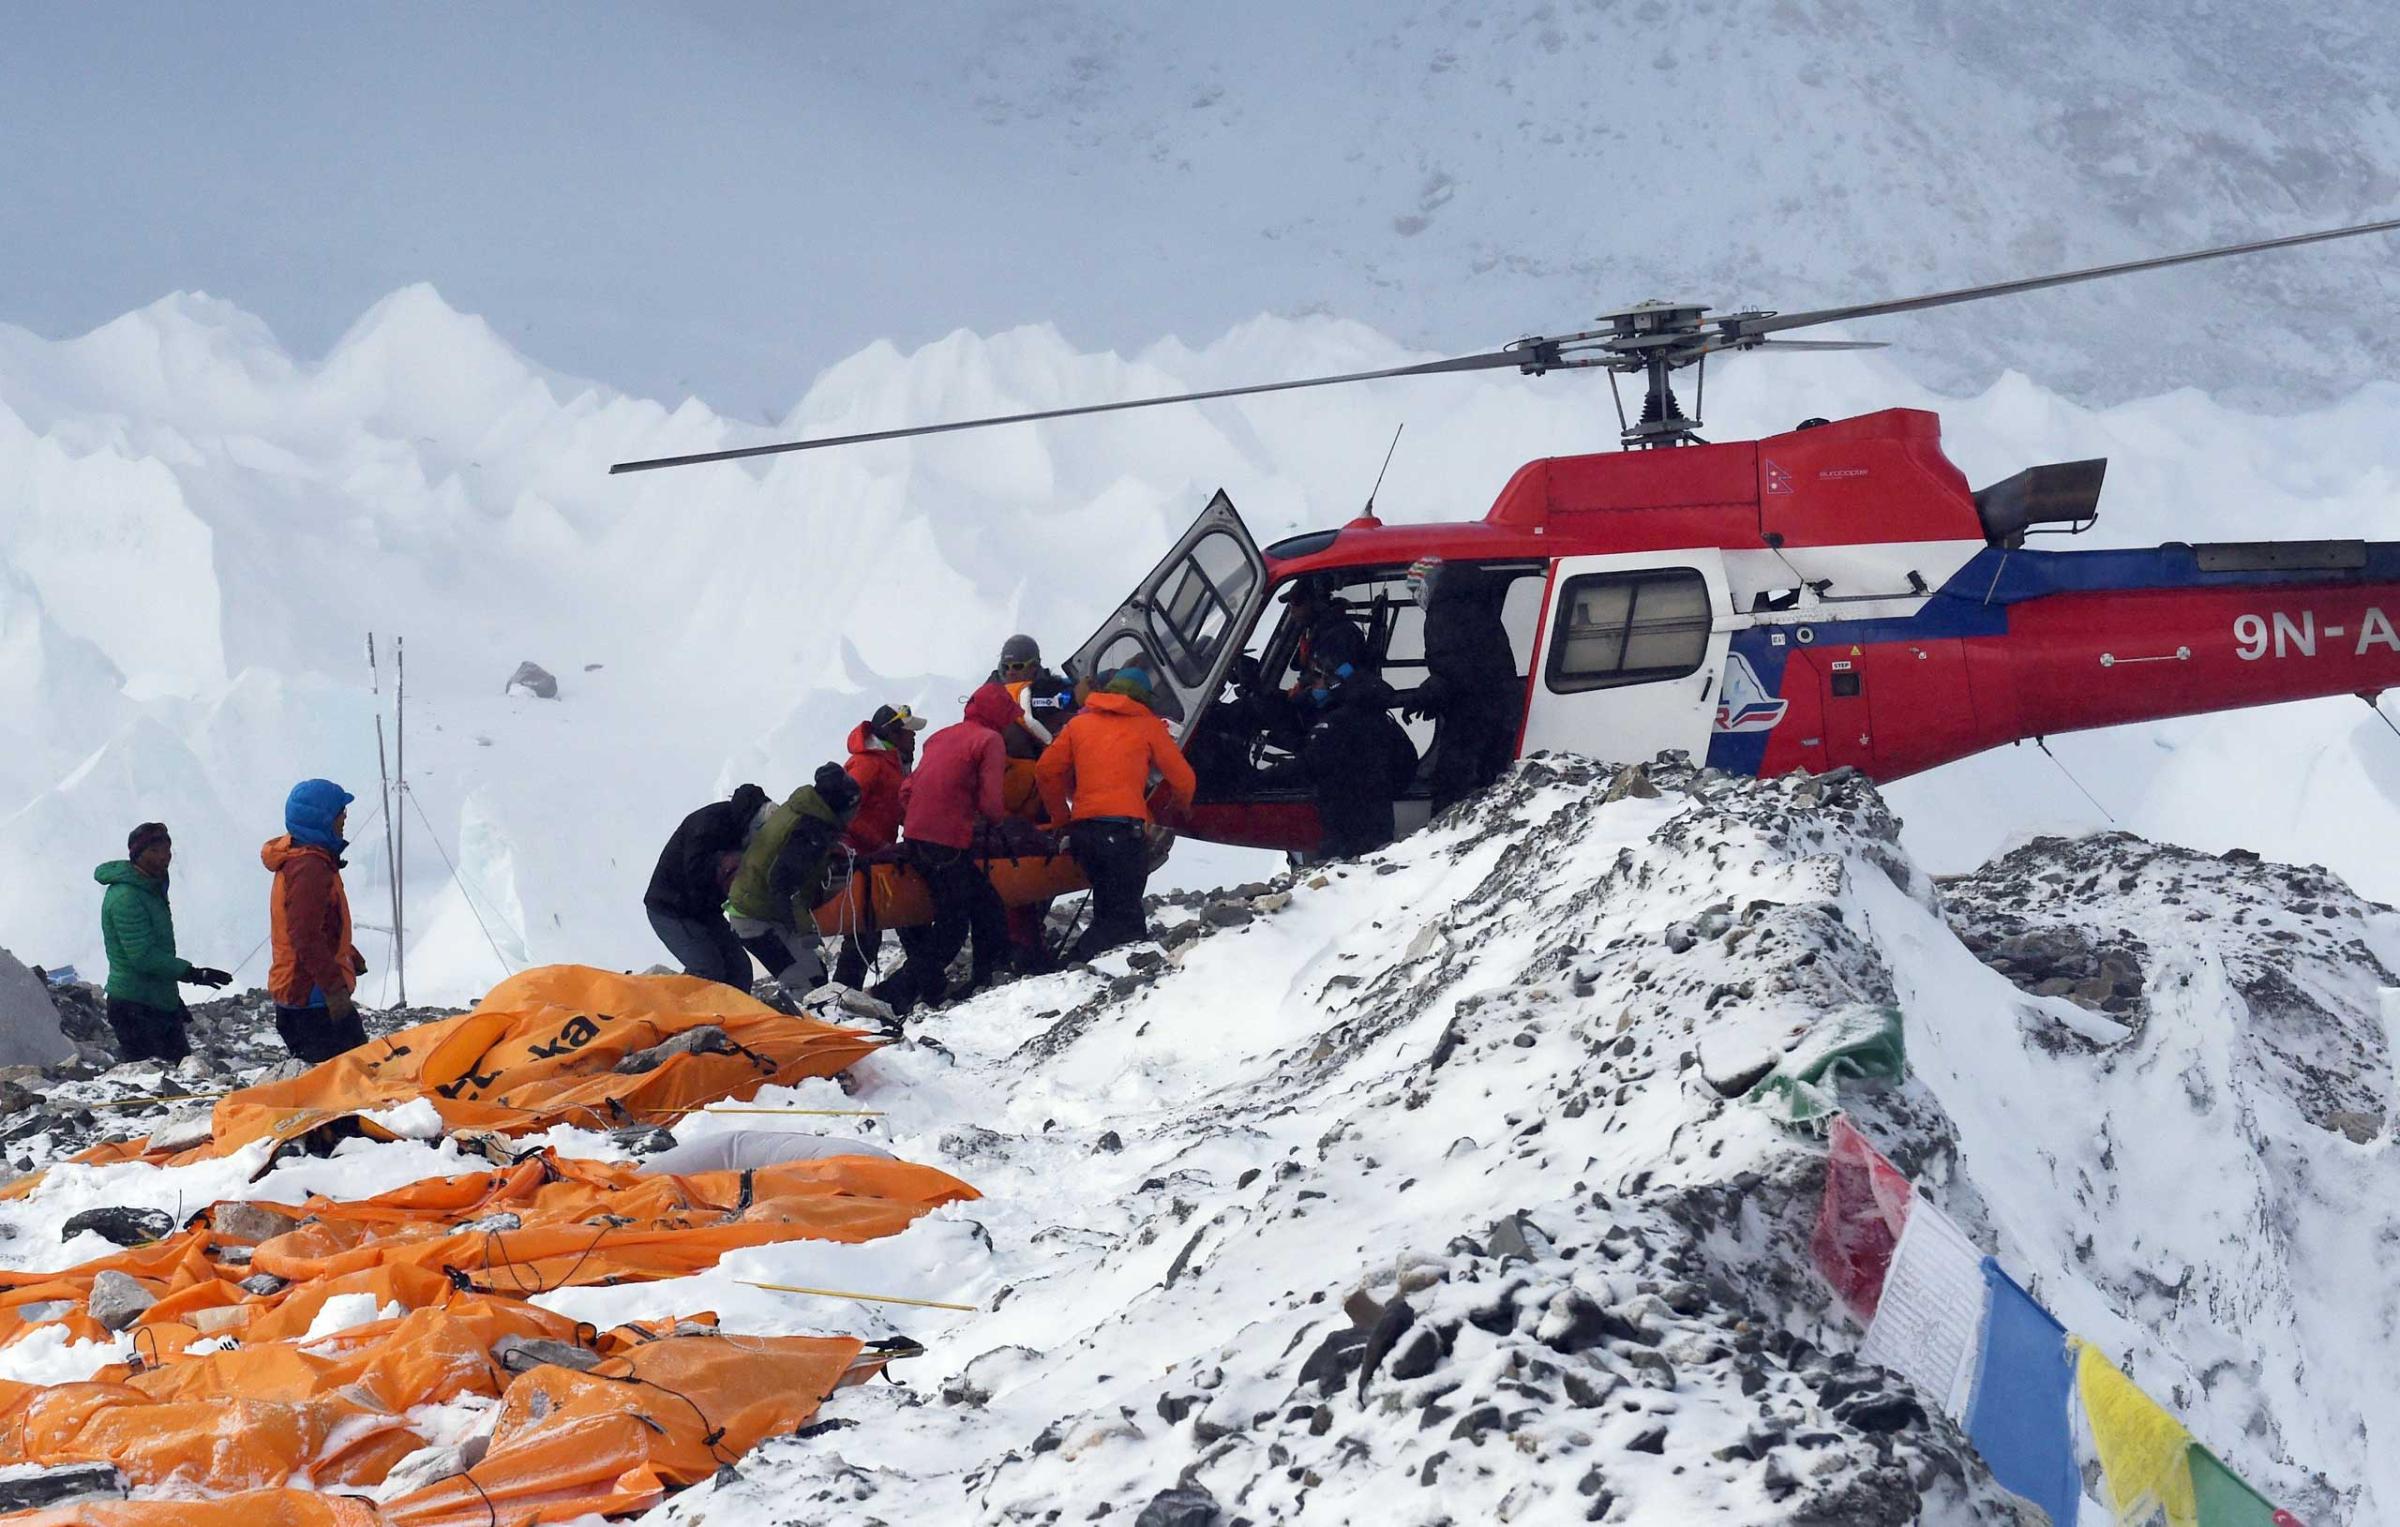 An injured person is loaded onto a rescue helicopter at Everest Base Camp on April 26, 2015.